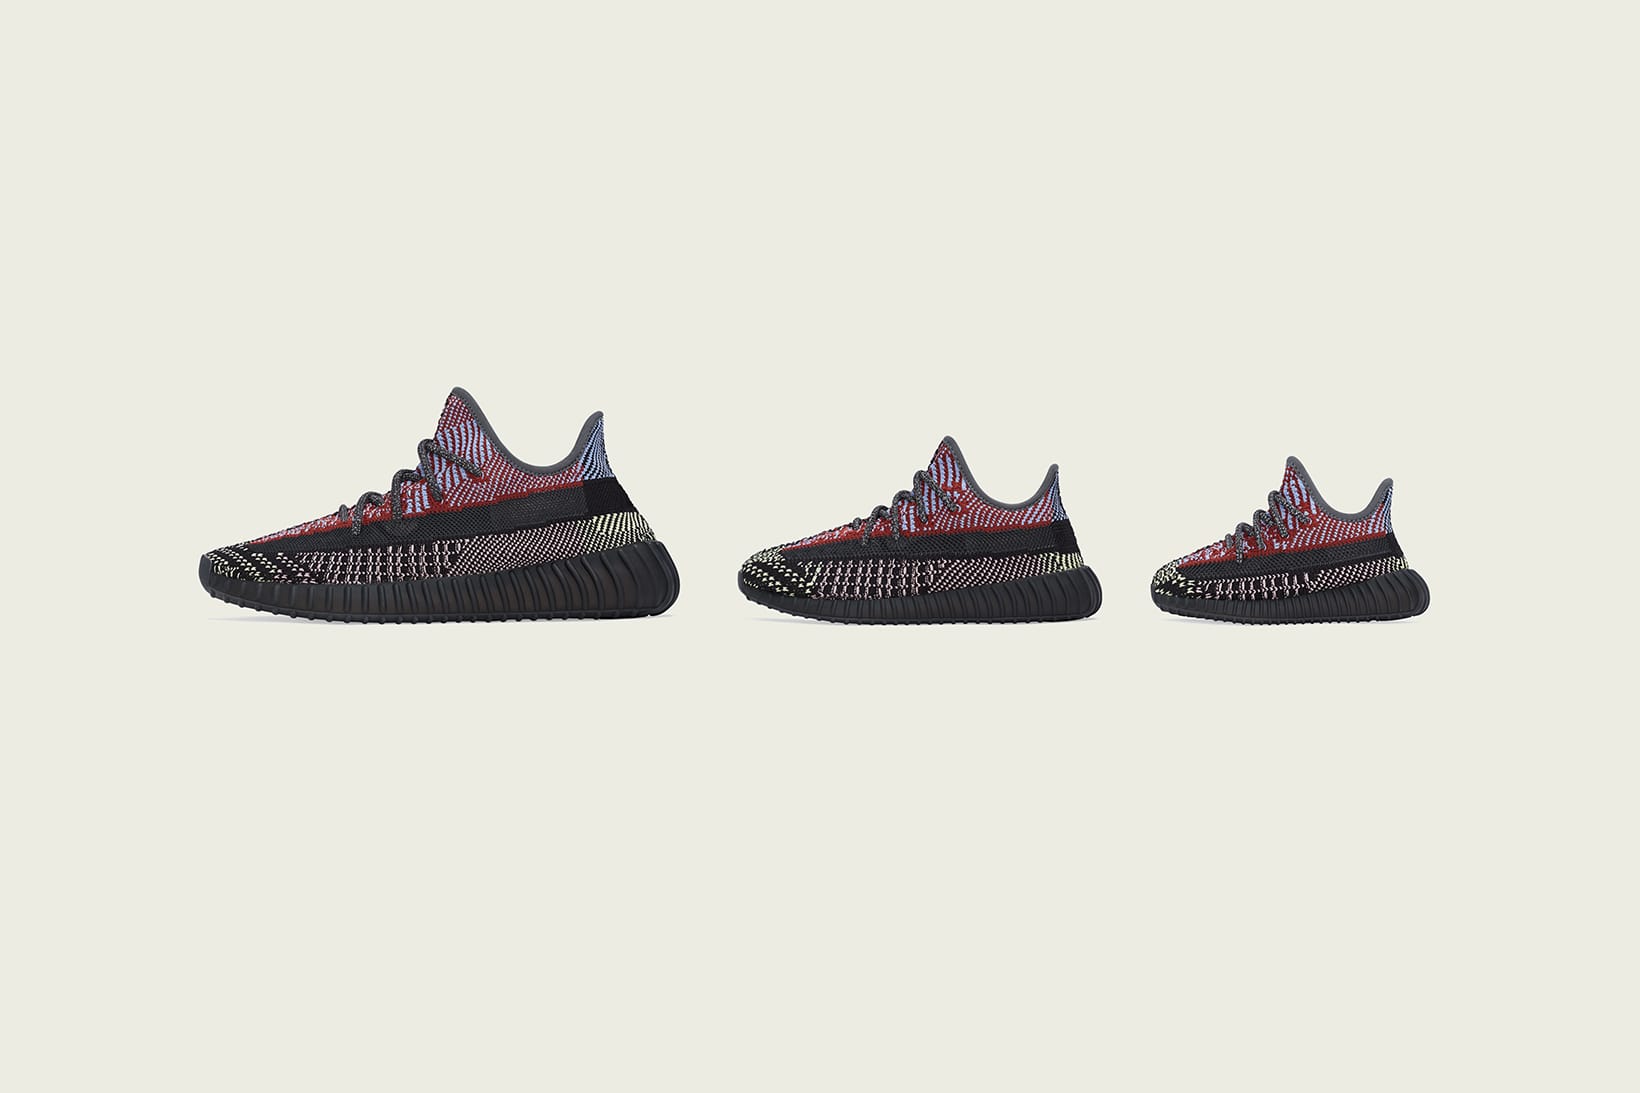 yeezy shoes 350 v2 price